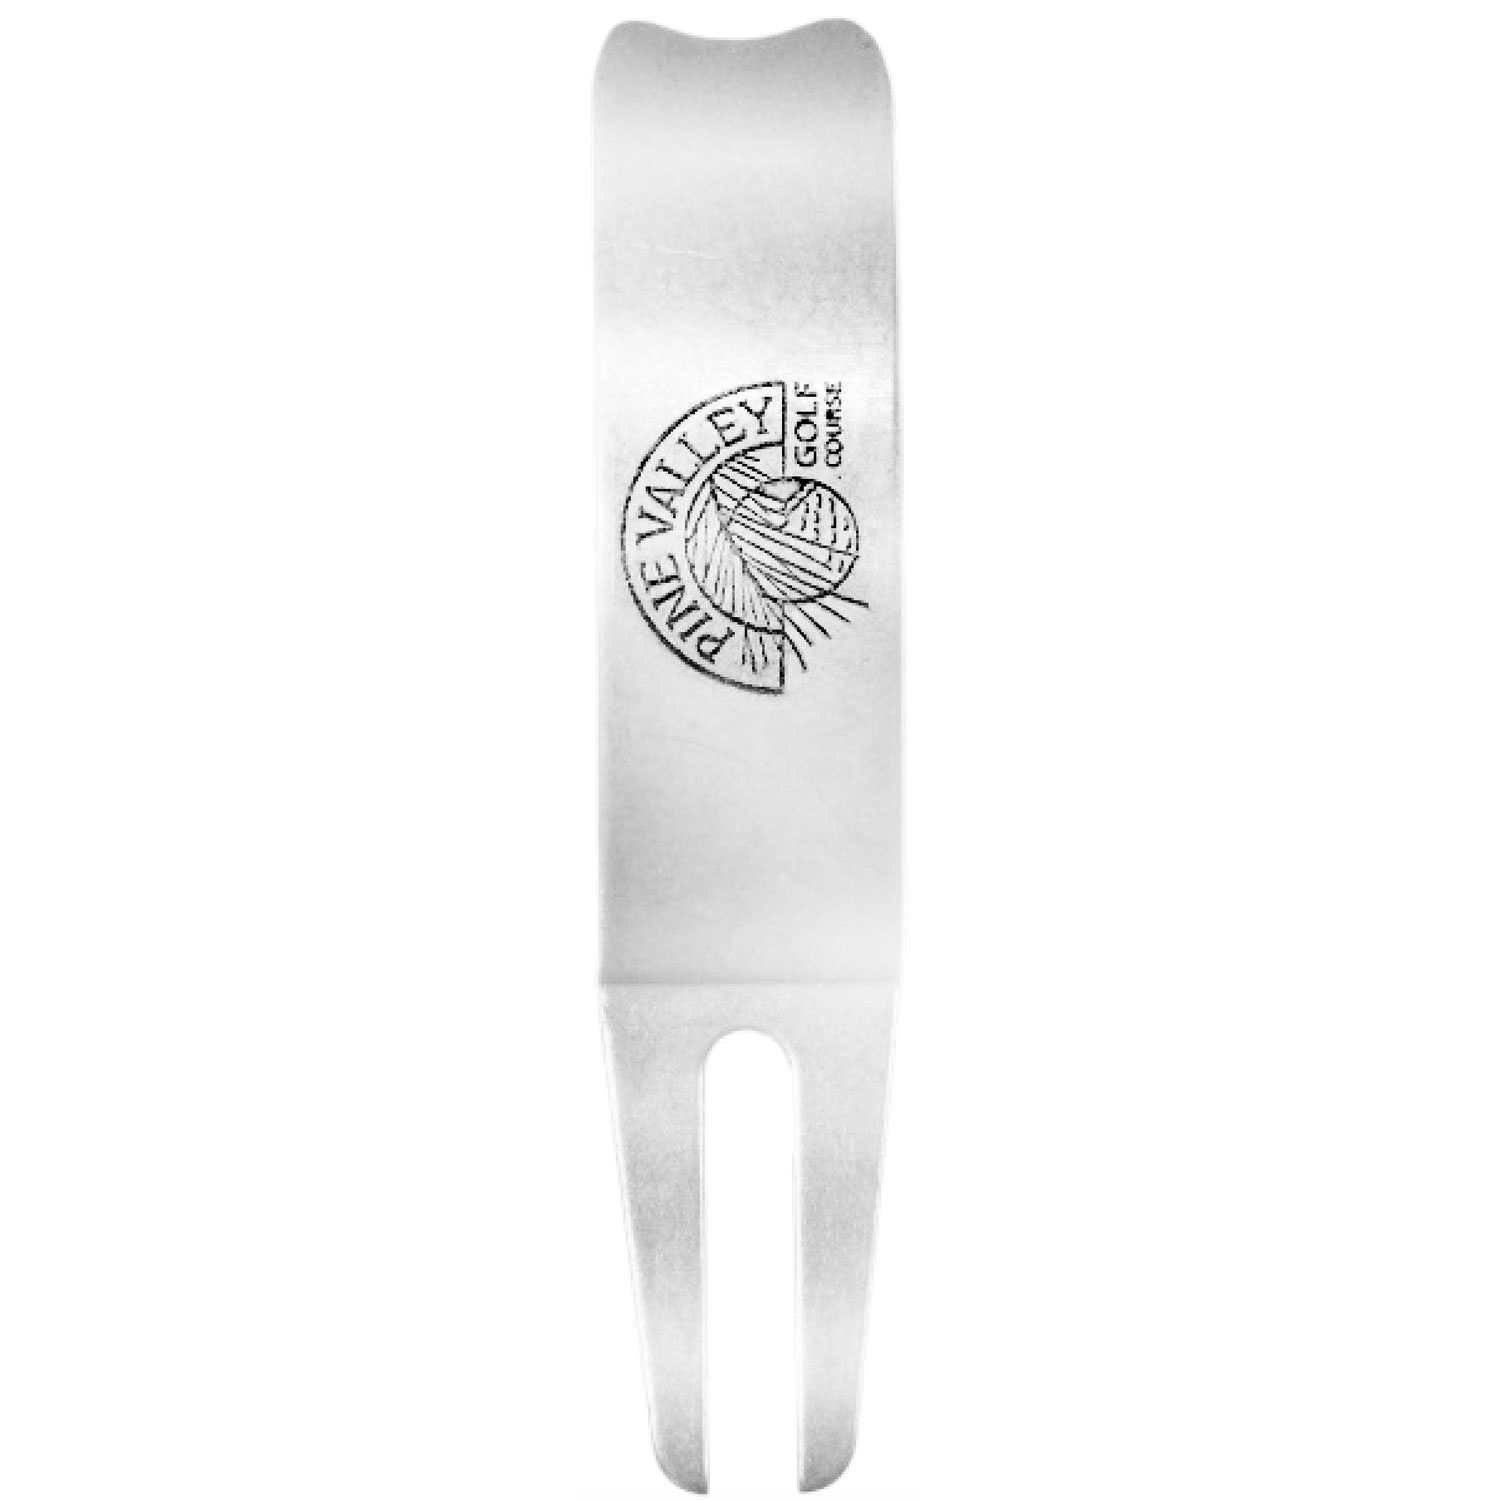 Metal Divot Tool With Wave And Club Rest - Die Struck Logo